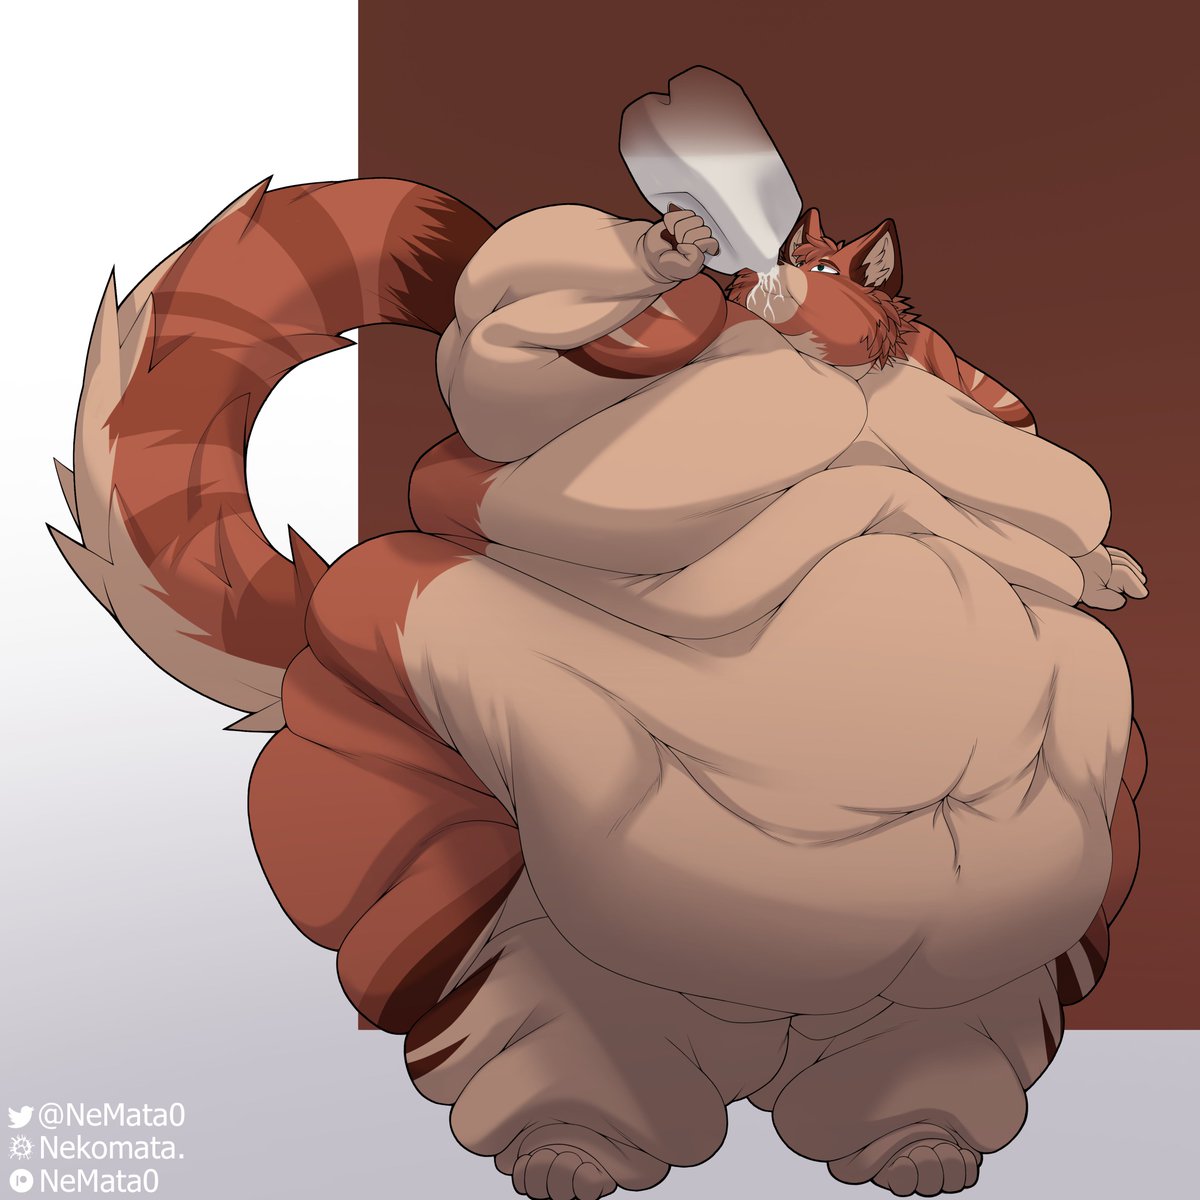 comm for @Ghijo9 I look just like him, OwO but I'm chubbier and taller and I also like milk a lot.